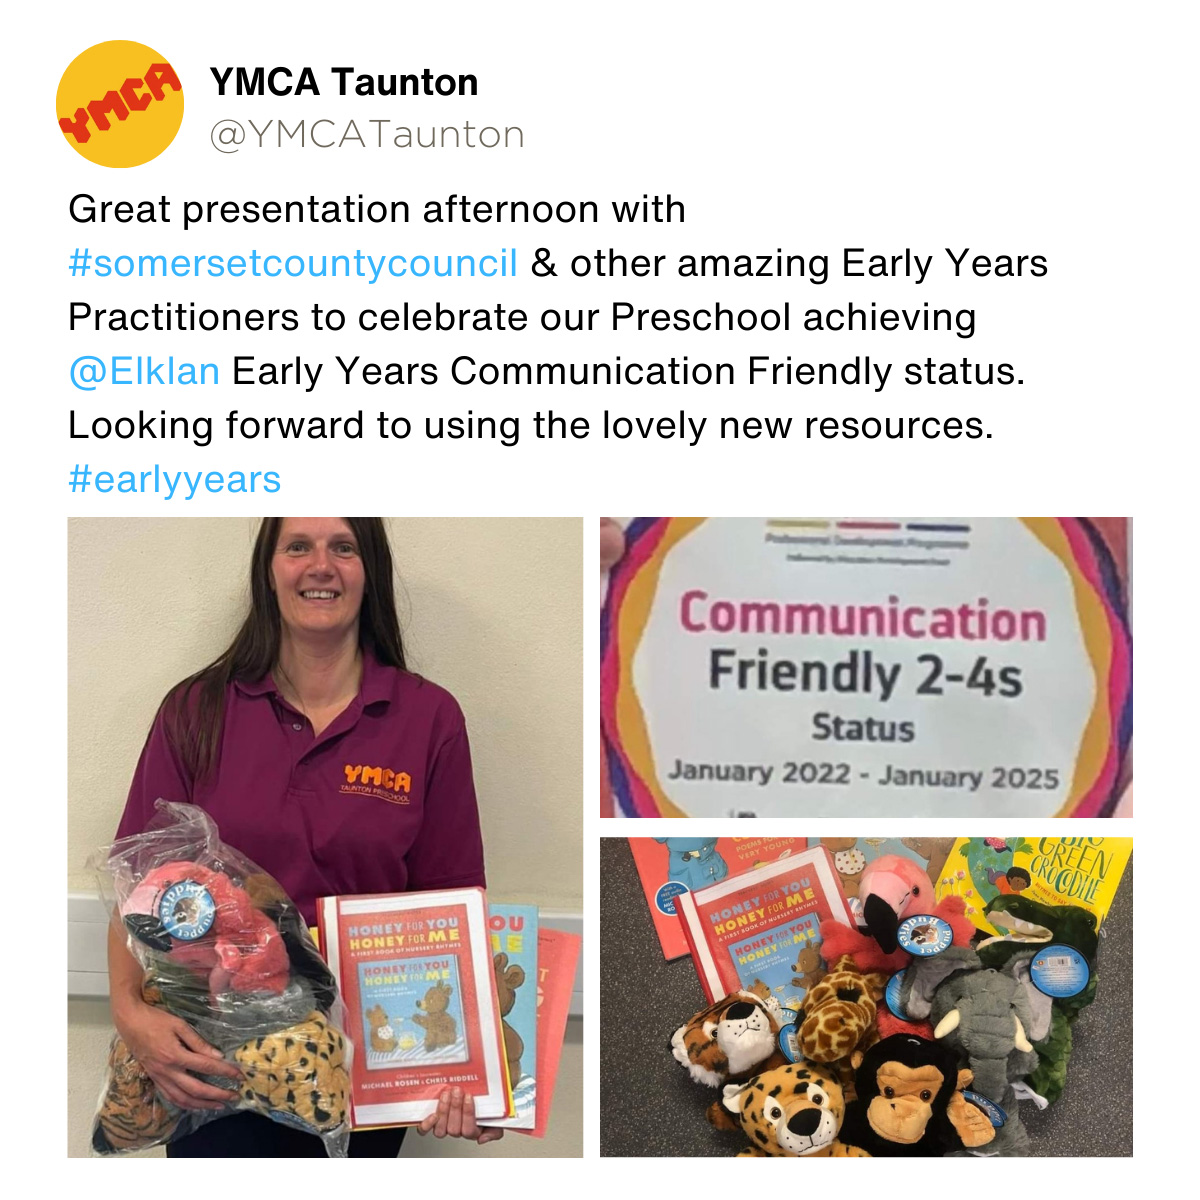 YMCA Taunton: Great presentation afternoon with Somerset County Council & other amazing Early Years Practitioners to celebrate our Preschool achieving Elklan Early Years Communication Friendly status. Looking forward to using the lovely new resources.